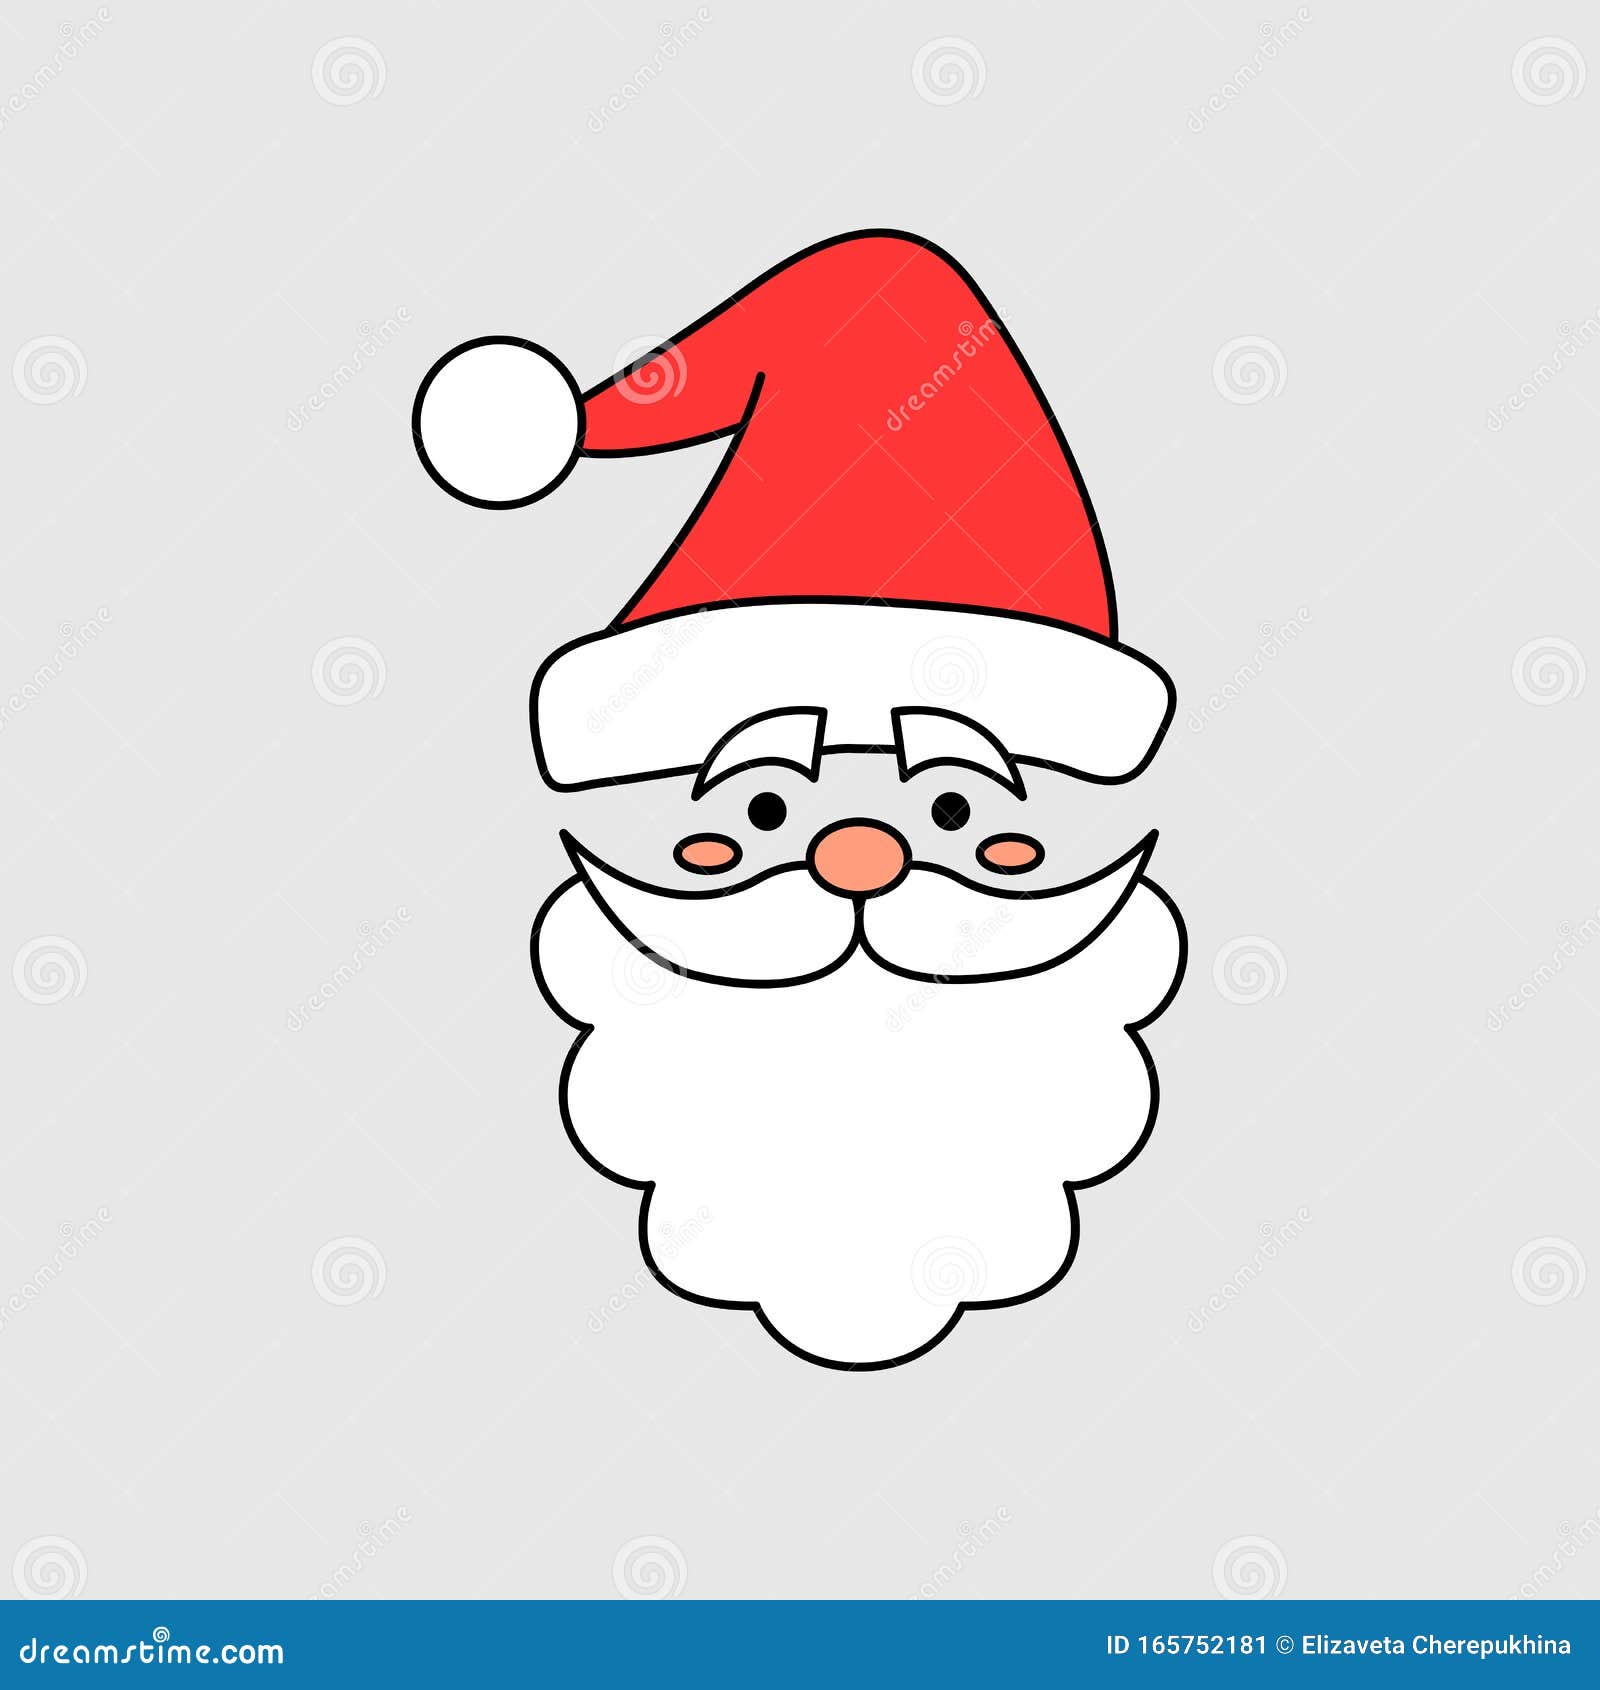 Hong Kong Del Norte pueblo Santa Claus Face with Beard and Mustaches - Vector Icon. Santa Claus with  Red Hat Stock Vector - Illustration of graphic, cute: 165752181